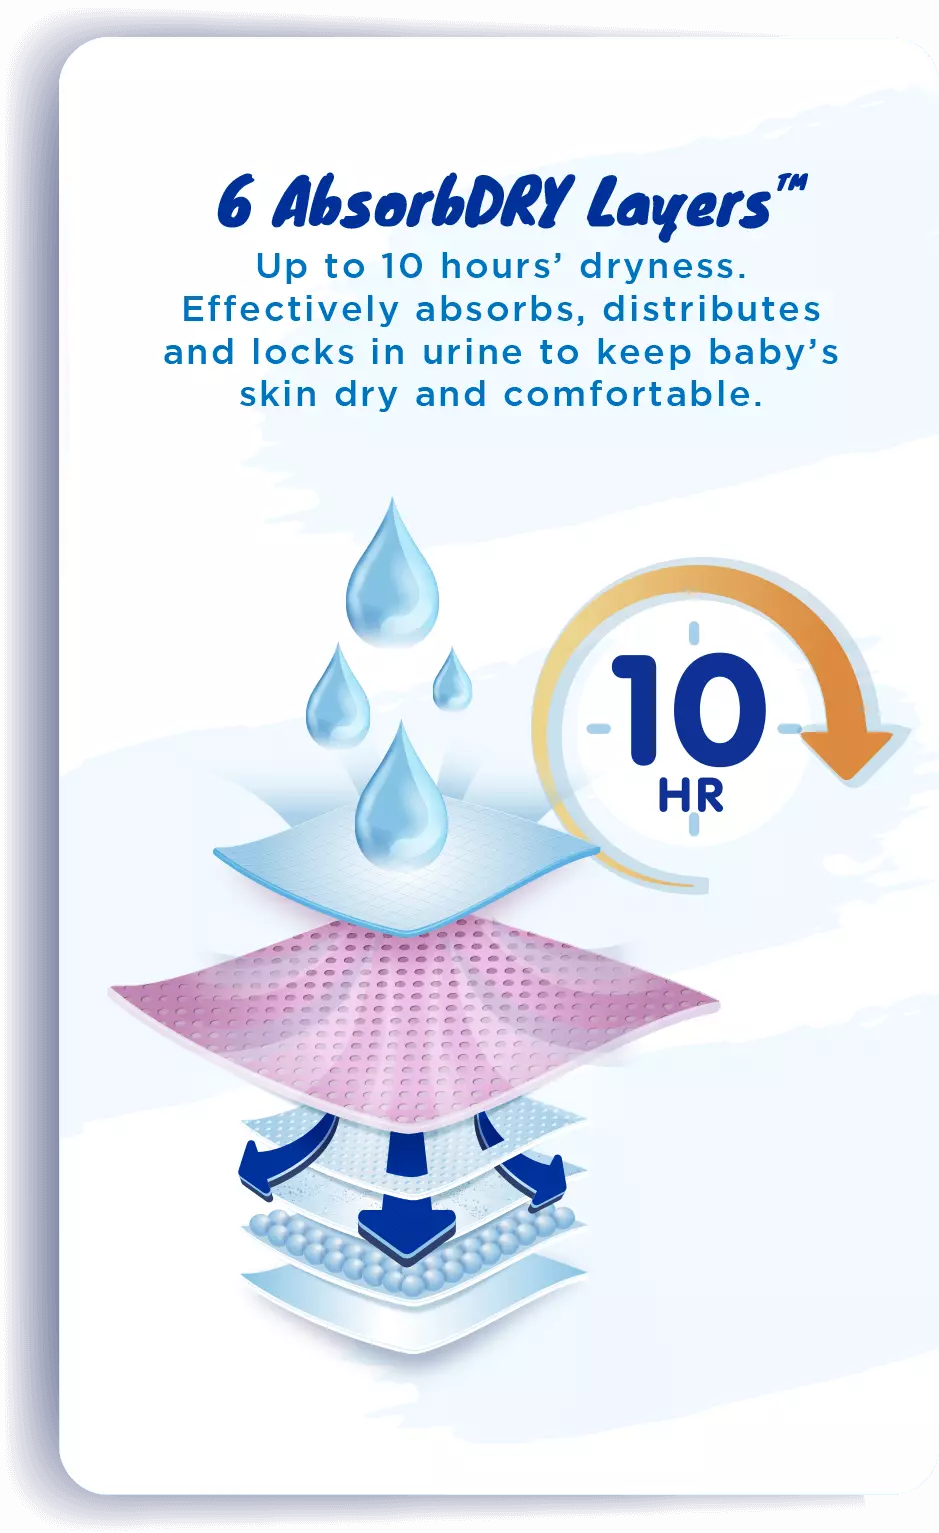 6 Absorbs Dry Layers™: Up to 10 hours' dryness. Effectively absorbs, distributes and locks in urine to keep baby's skin dry and comfortable.